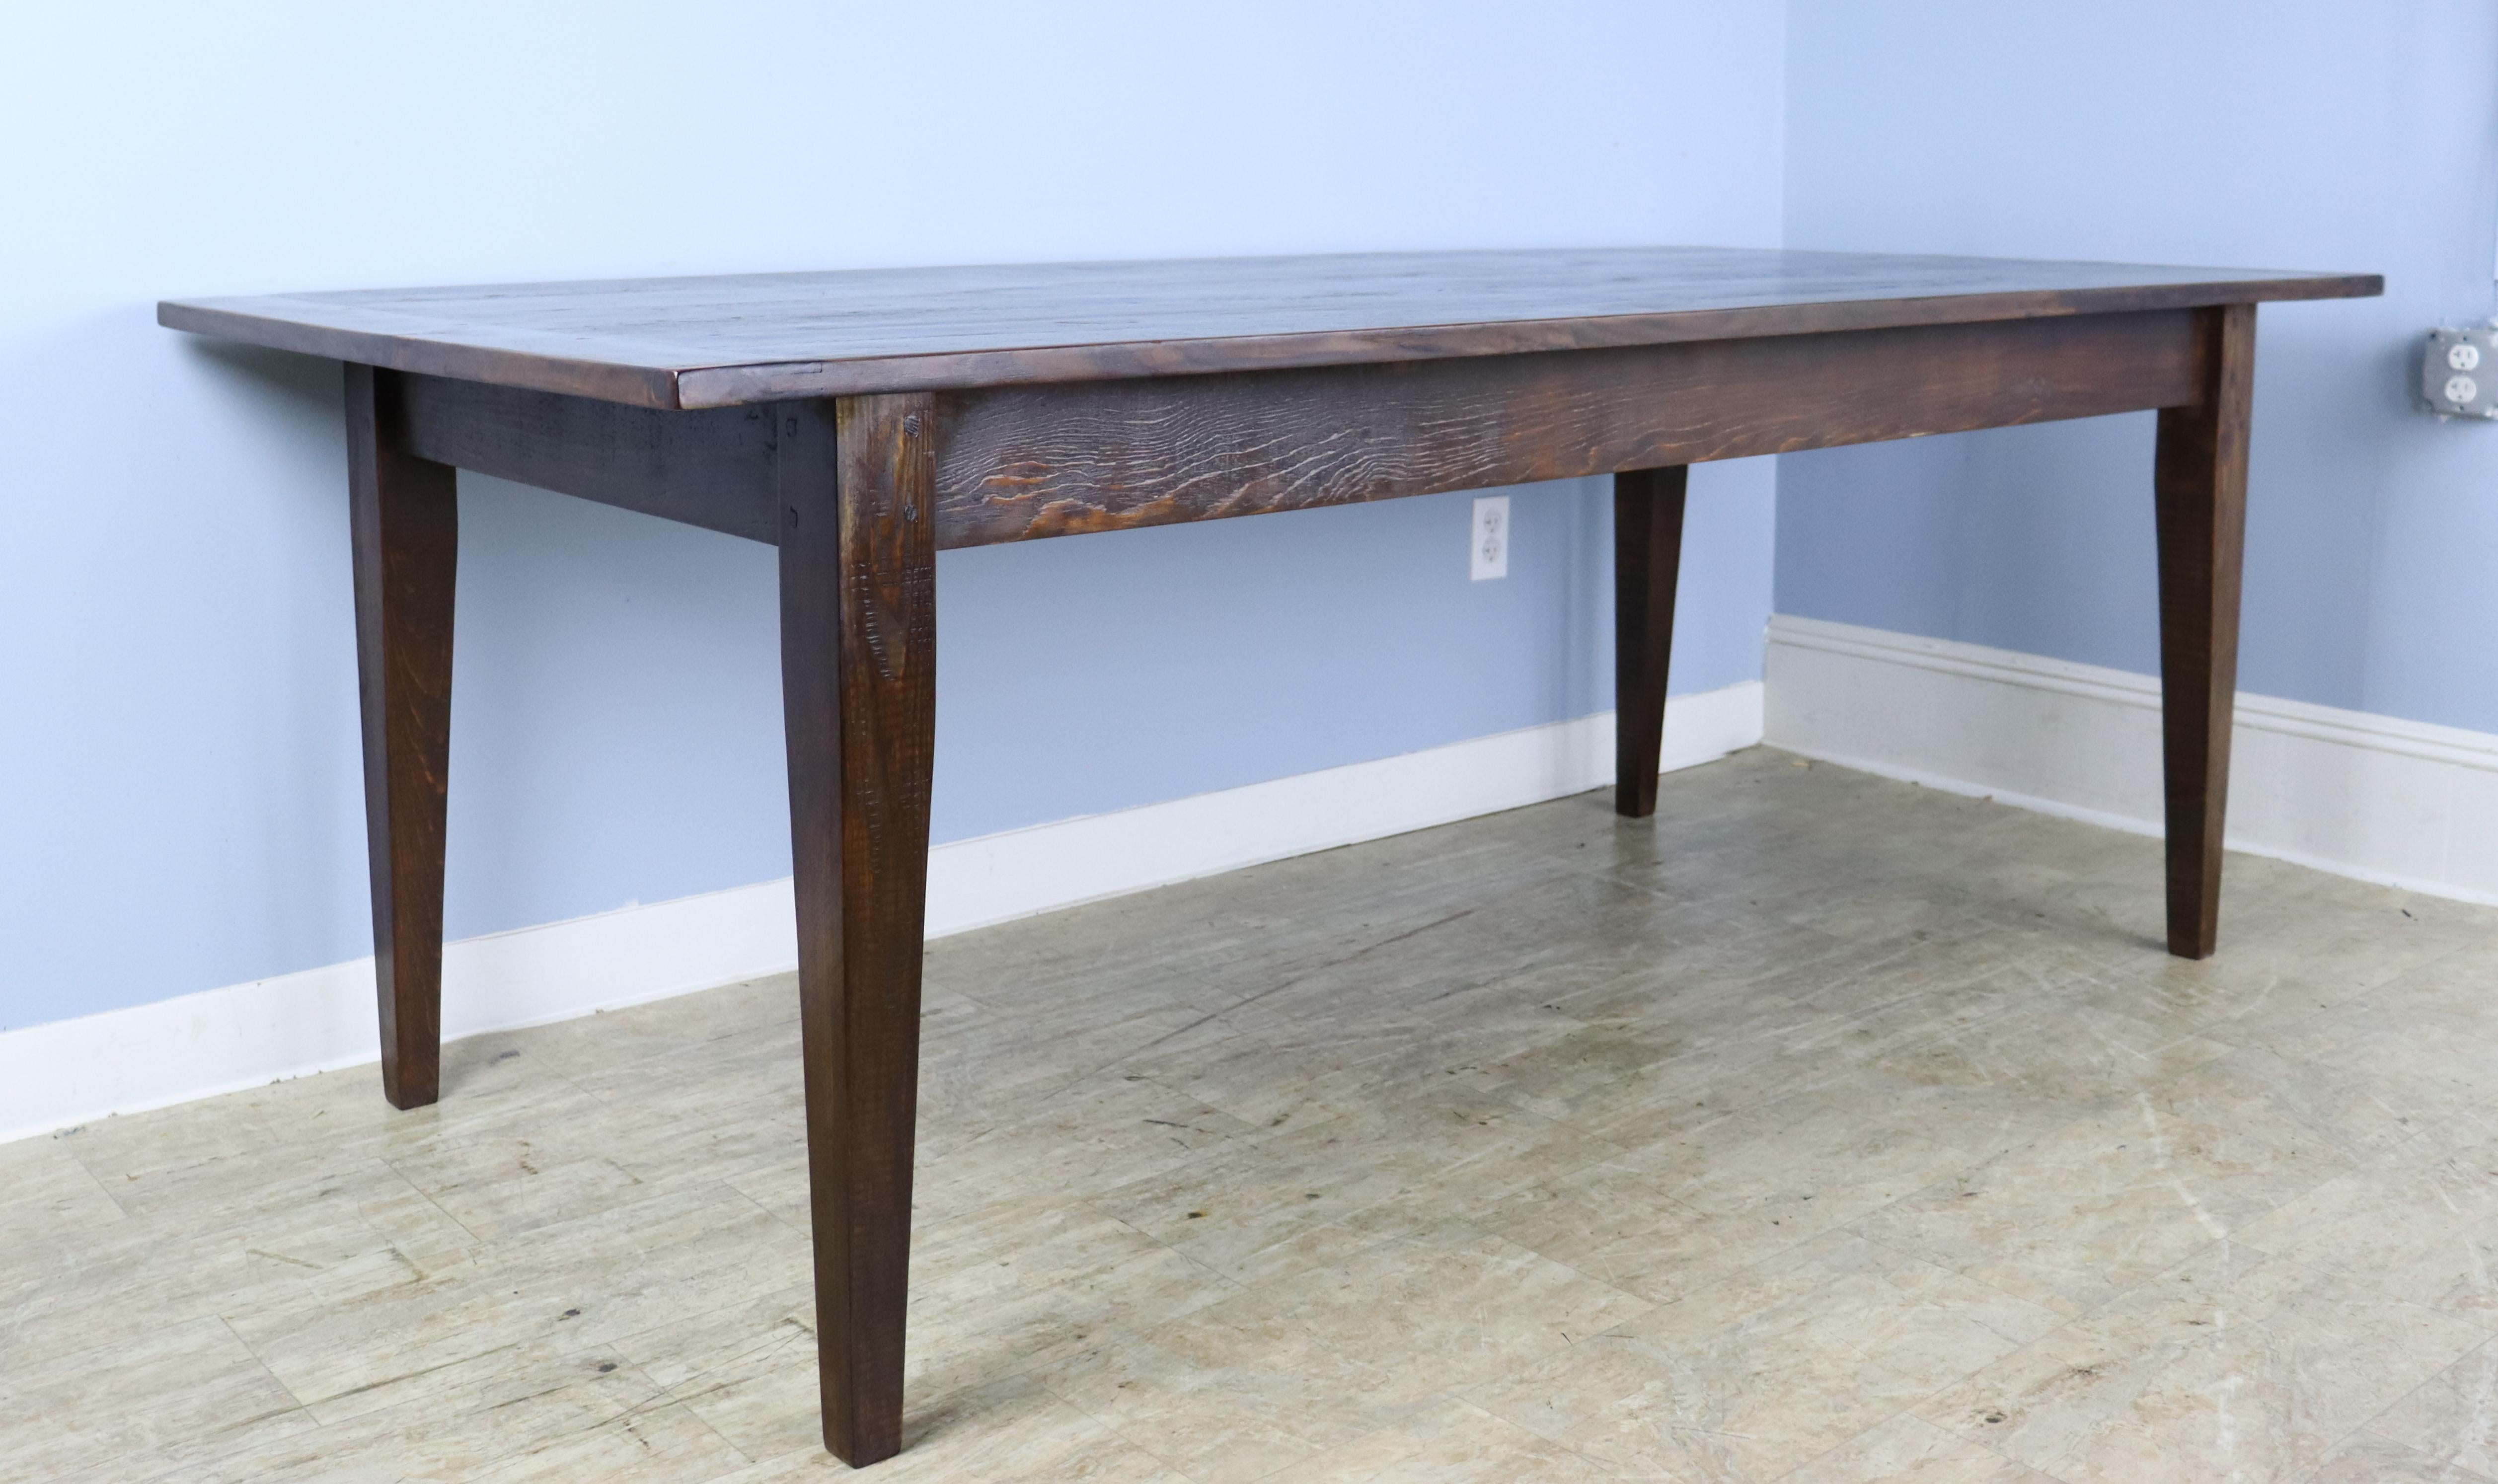 A generously proportioned, thick topped pine farm table stained in a rich brown, 7' with some mild faux distress. With 68 inches between the legs, this table can easily fit eight with room for a Thanksgiving dinner as well! The apron height of 25